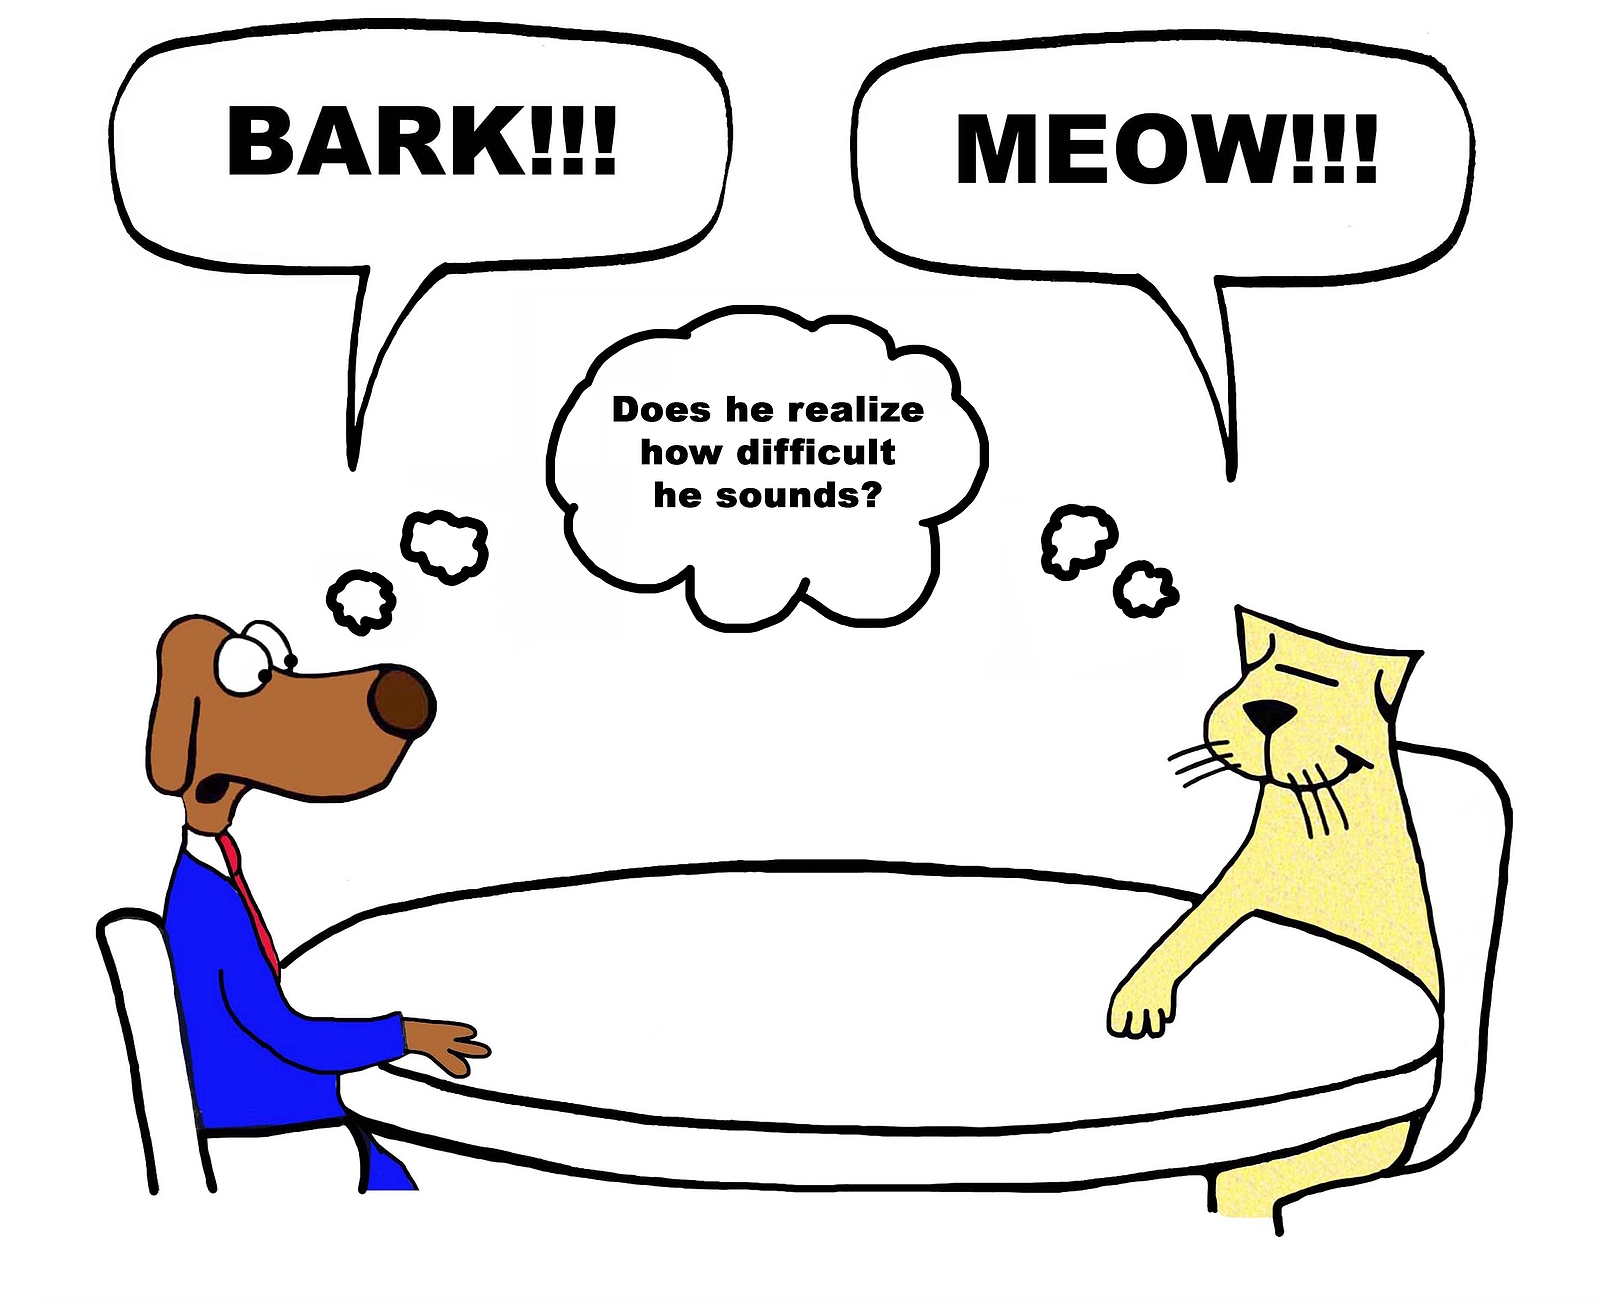 Cartoon between cat and dog depicts business miscommunication